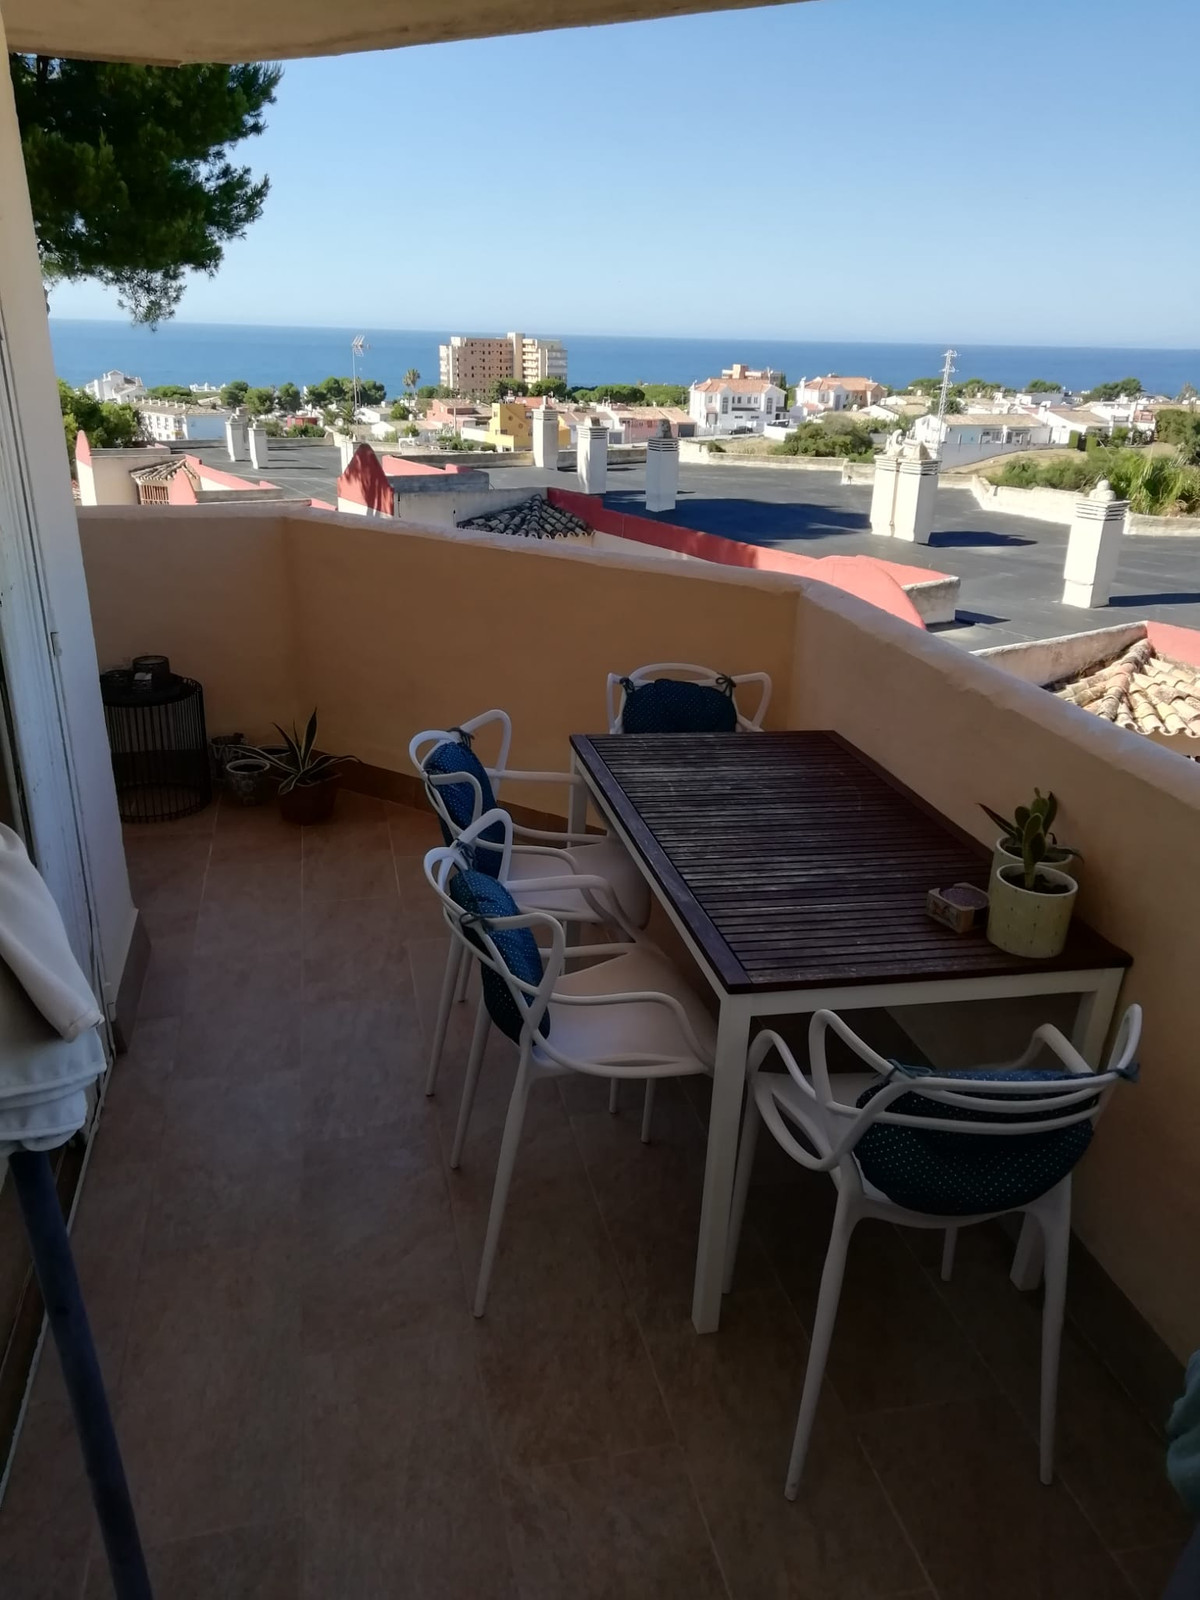 Lovely 2 bedroom appartement , fantastic sea views !!!
Close to all amenities , walking distance to , Spain